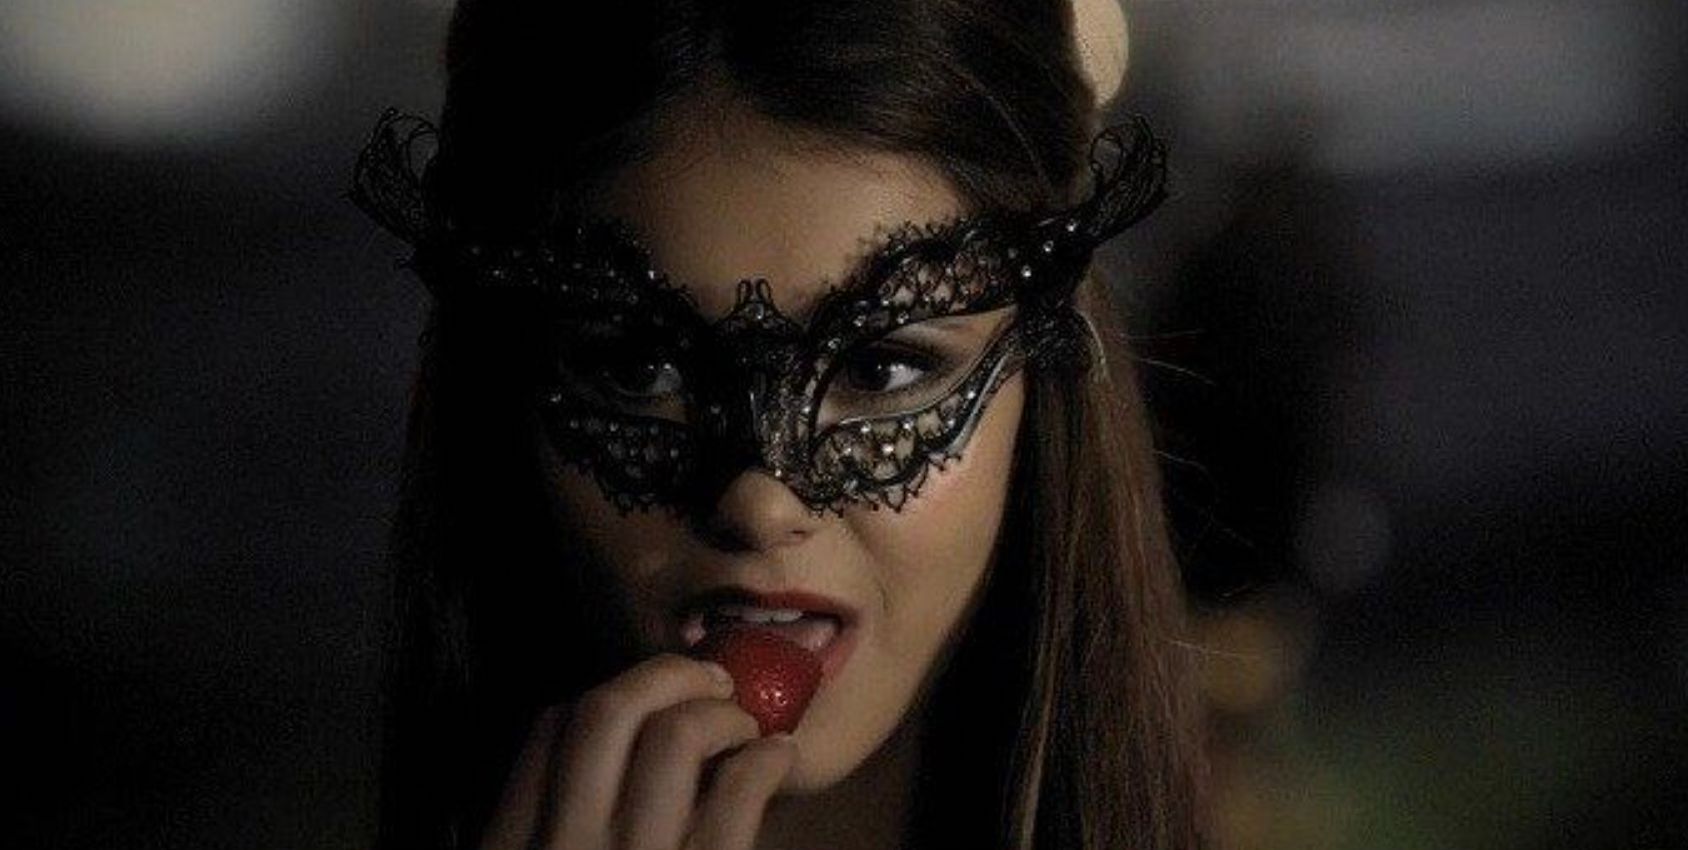 Katherine eating a strawberry in The Vampire Diaries Masquerade episode